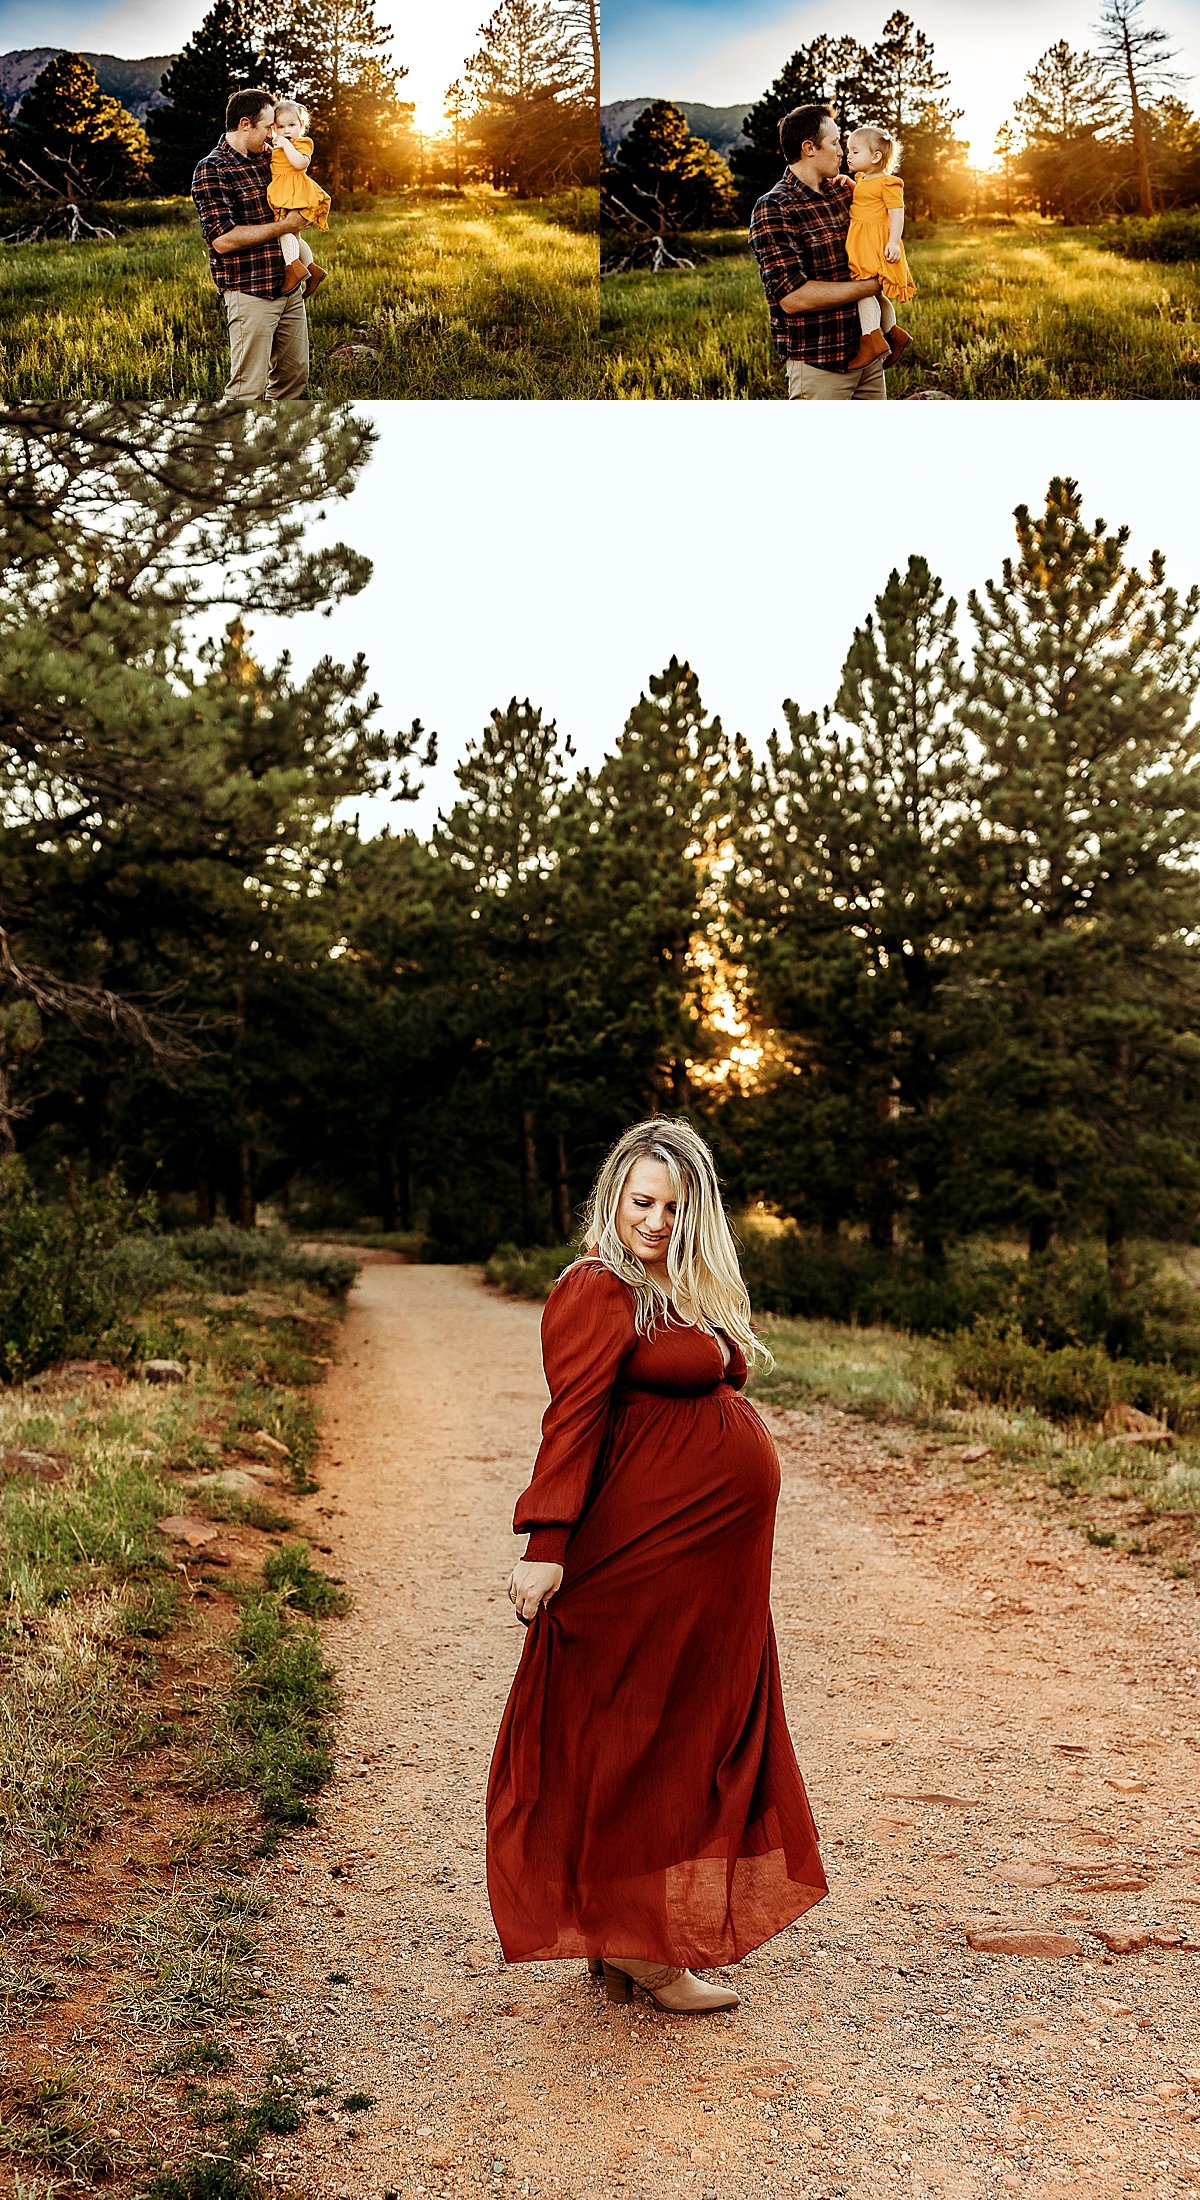  Single portraits of mom wearing maternity dress in sunset by Christa paustenbaugh photography 